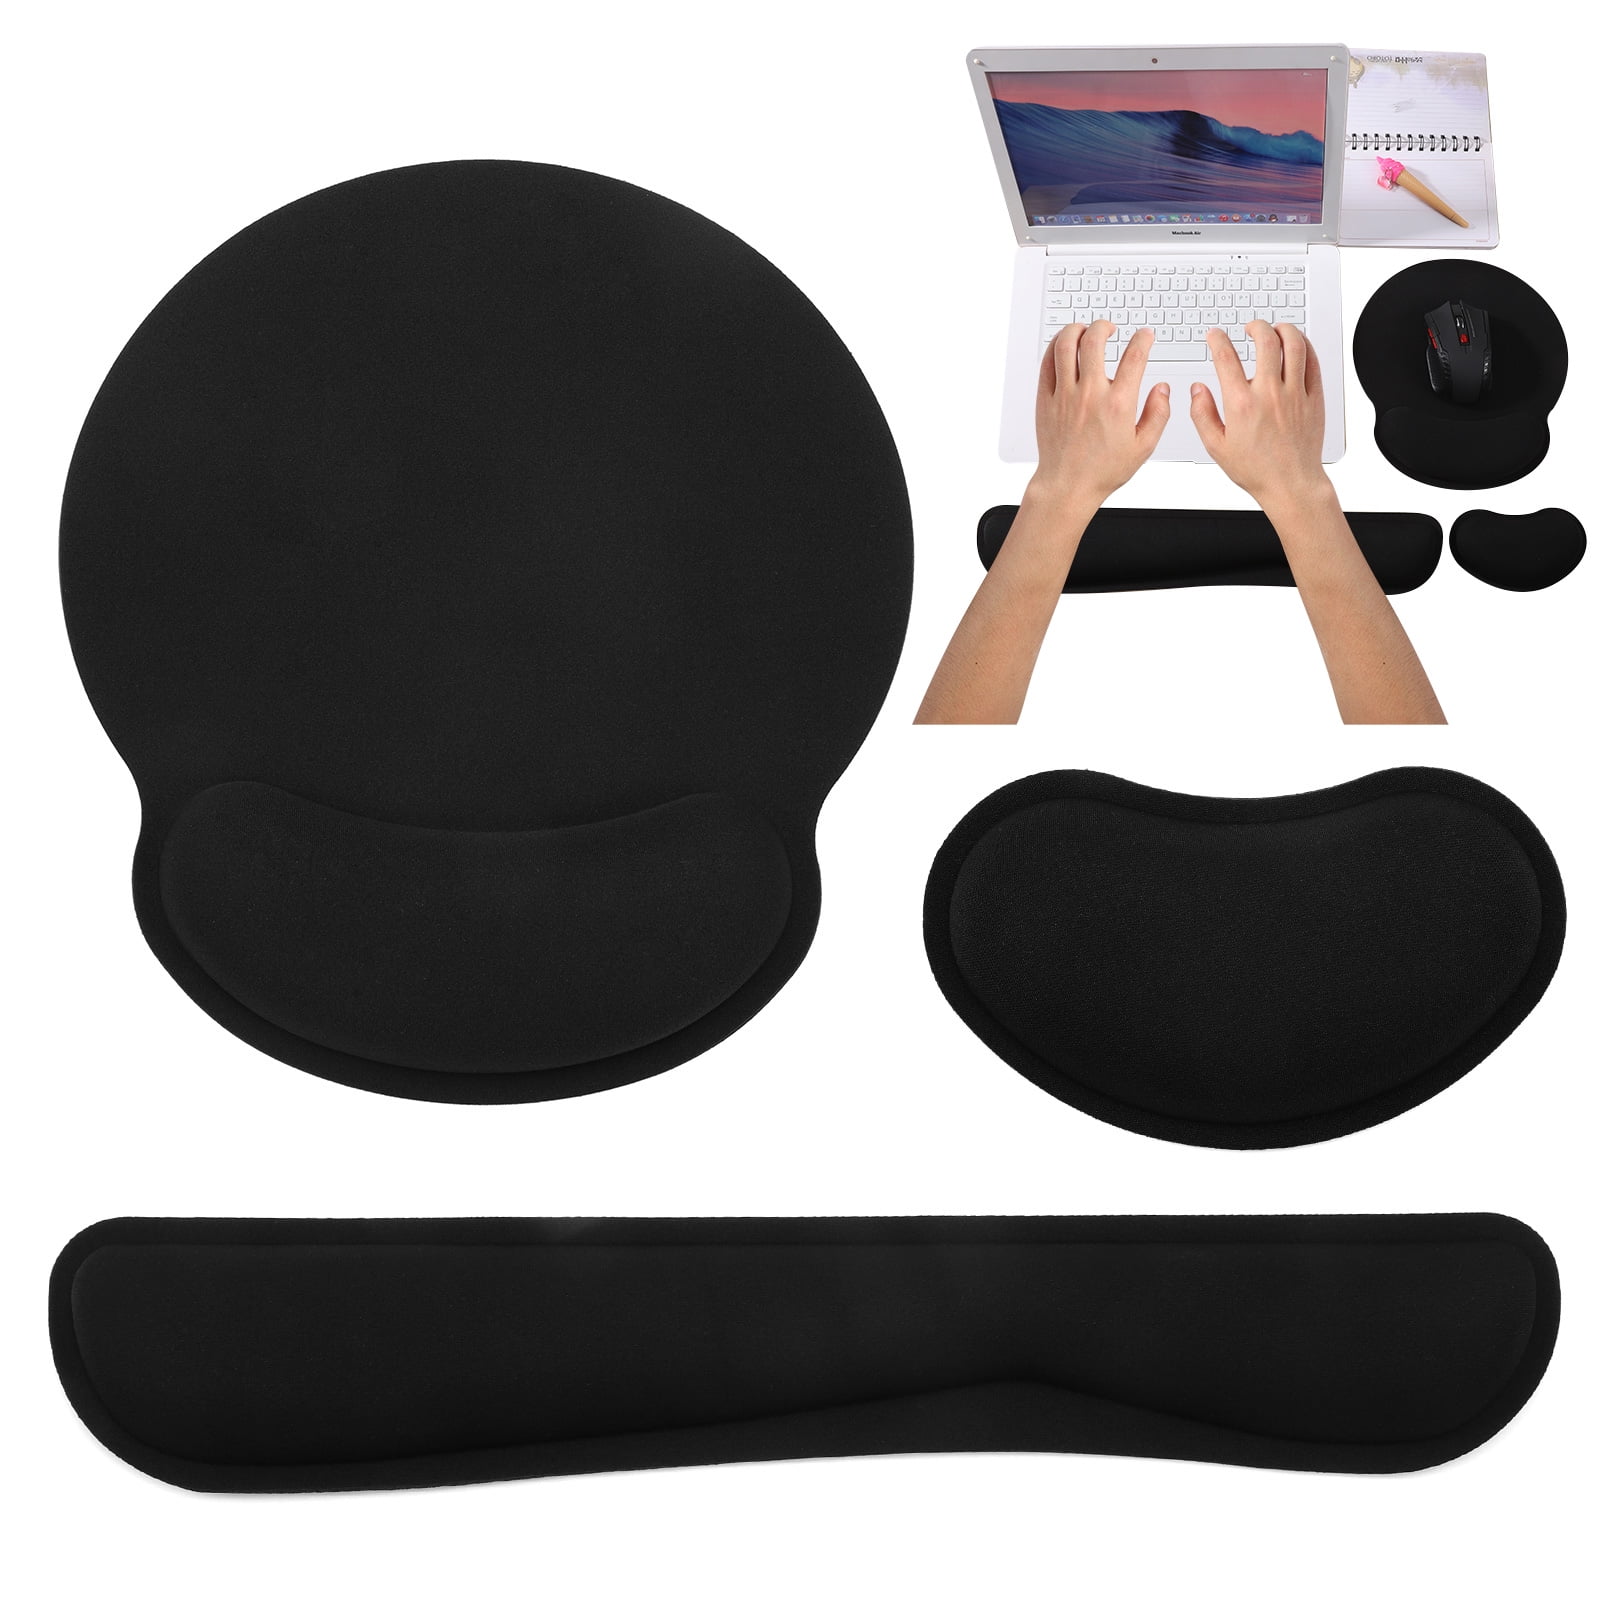  Keyboard Mouse Pad Set,Desk Pad + Keyboard Wrist Rest  Support+Wrist Rest, Easy Typing Pain Relief,4Pcs